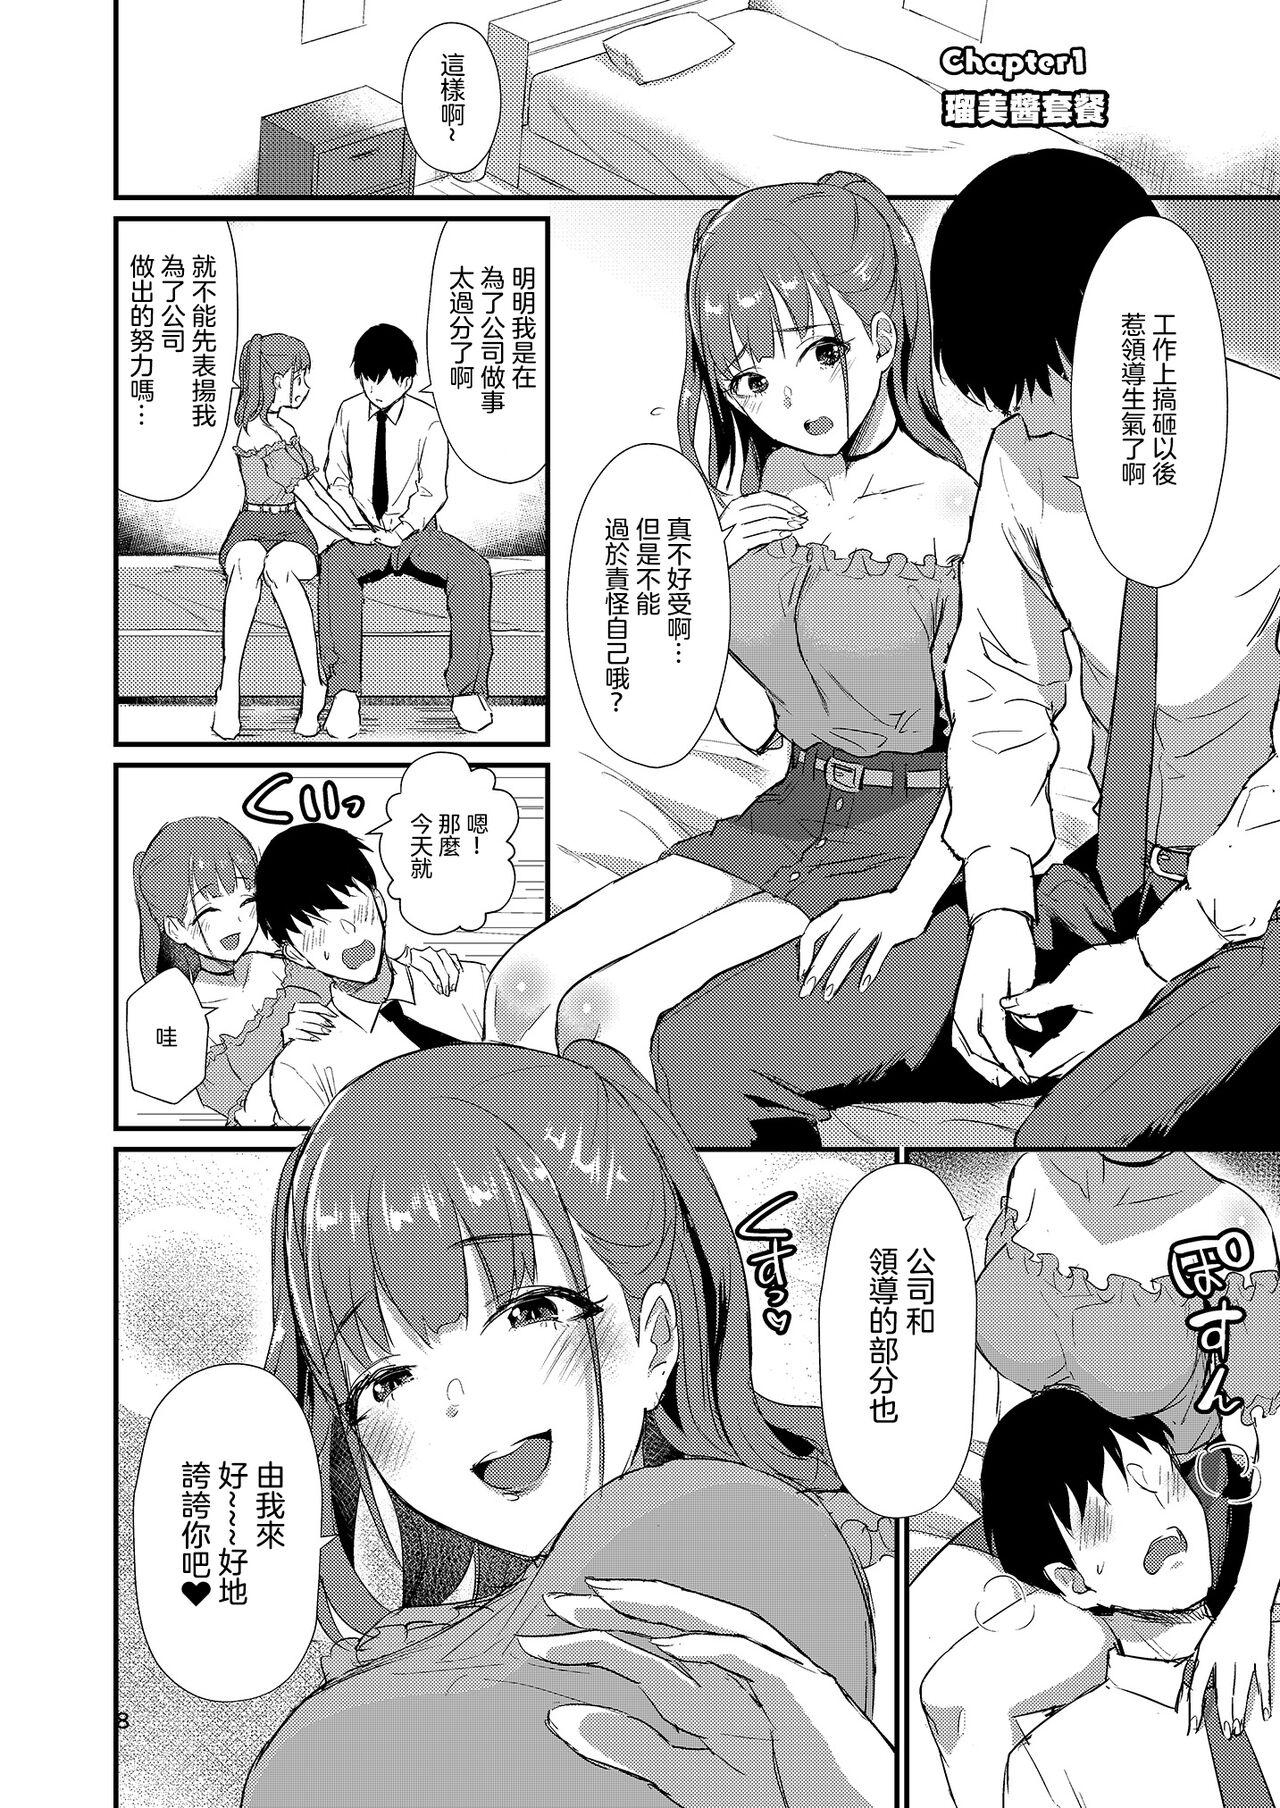 Girl Girl Homehome Home e Youkoso! - Welcome to Home Home Home! | 歡迎來到誇誇屋！ Gay Physicals - Page 9